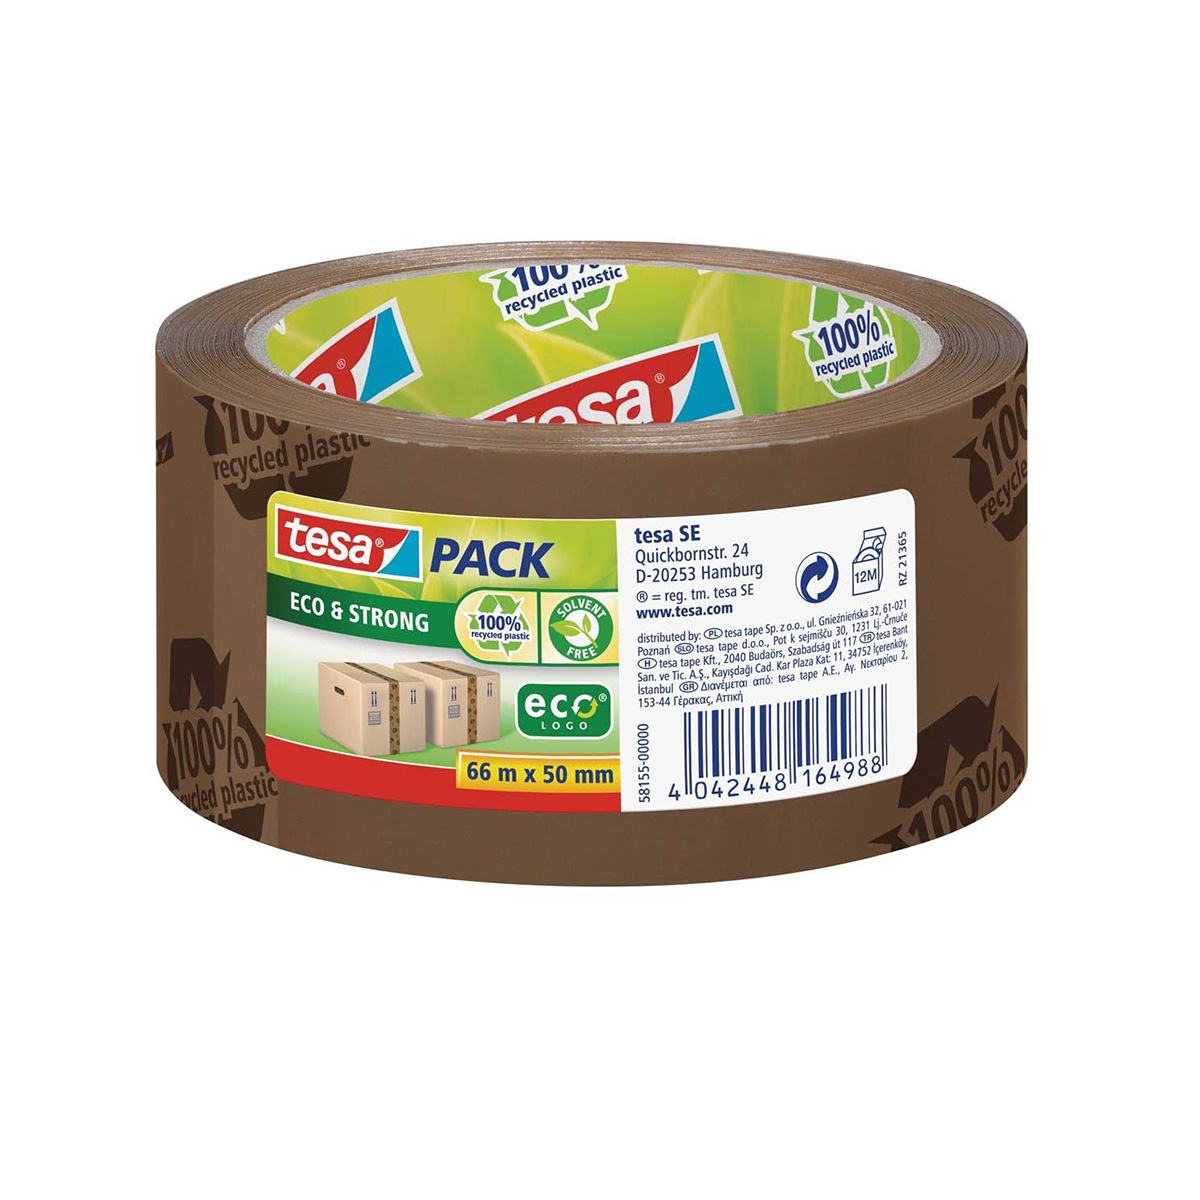 tesapack Eco & Strong 50 mm x 66 m printed parcel tape brown